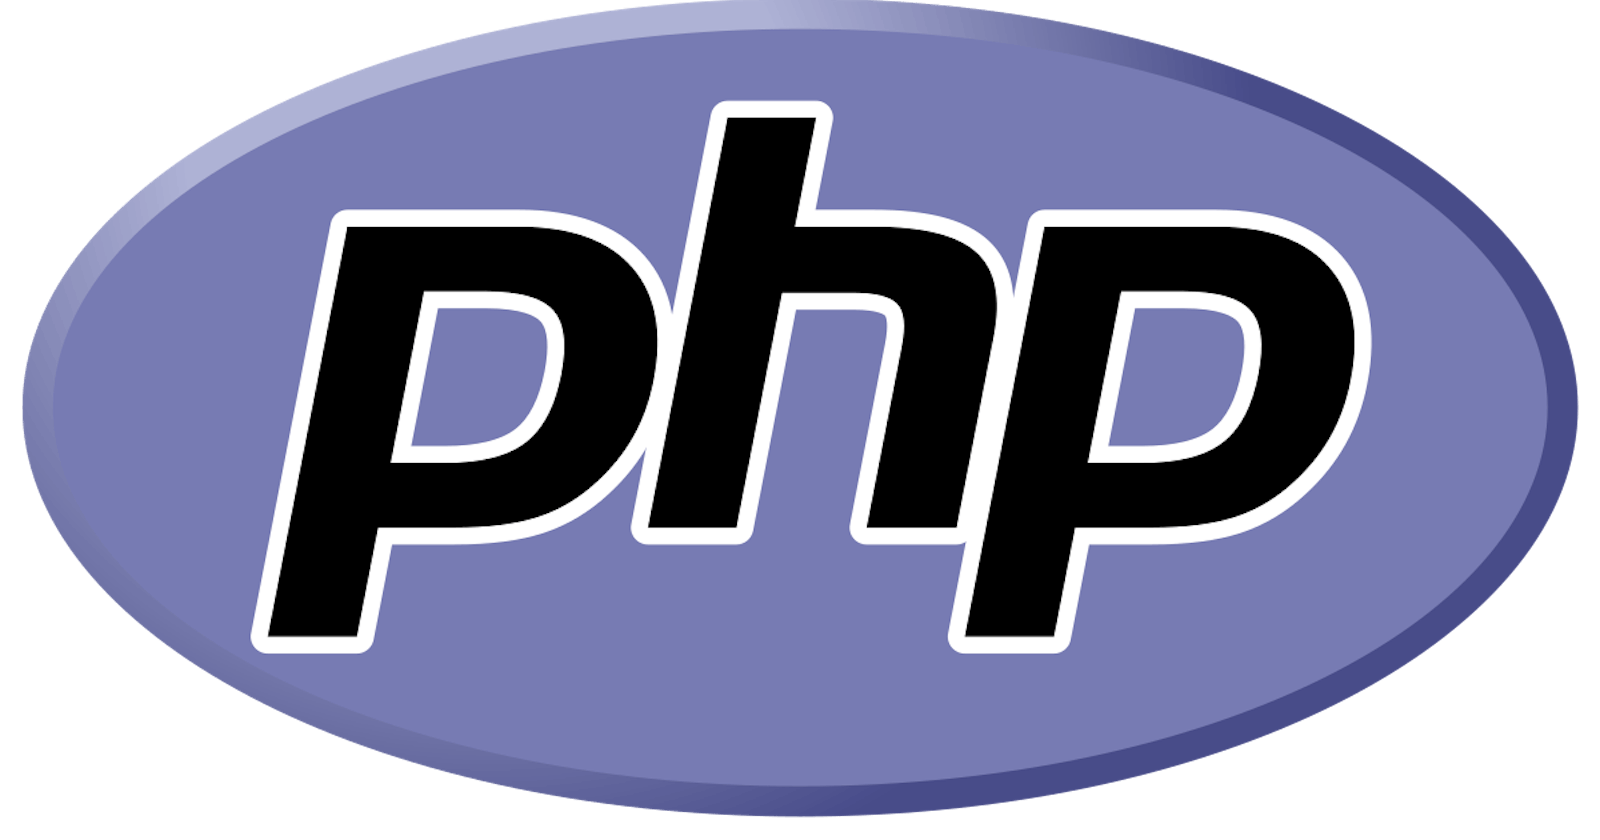 What is PHP? The PHP programming meaning explained